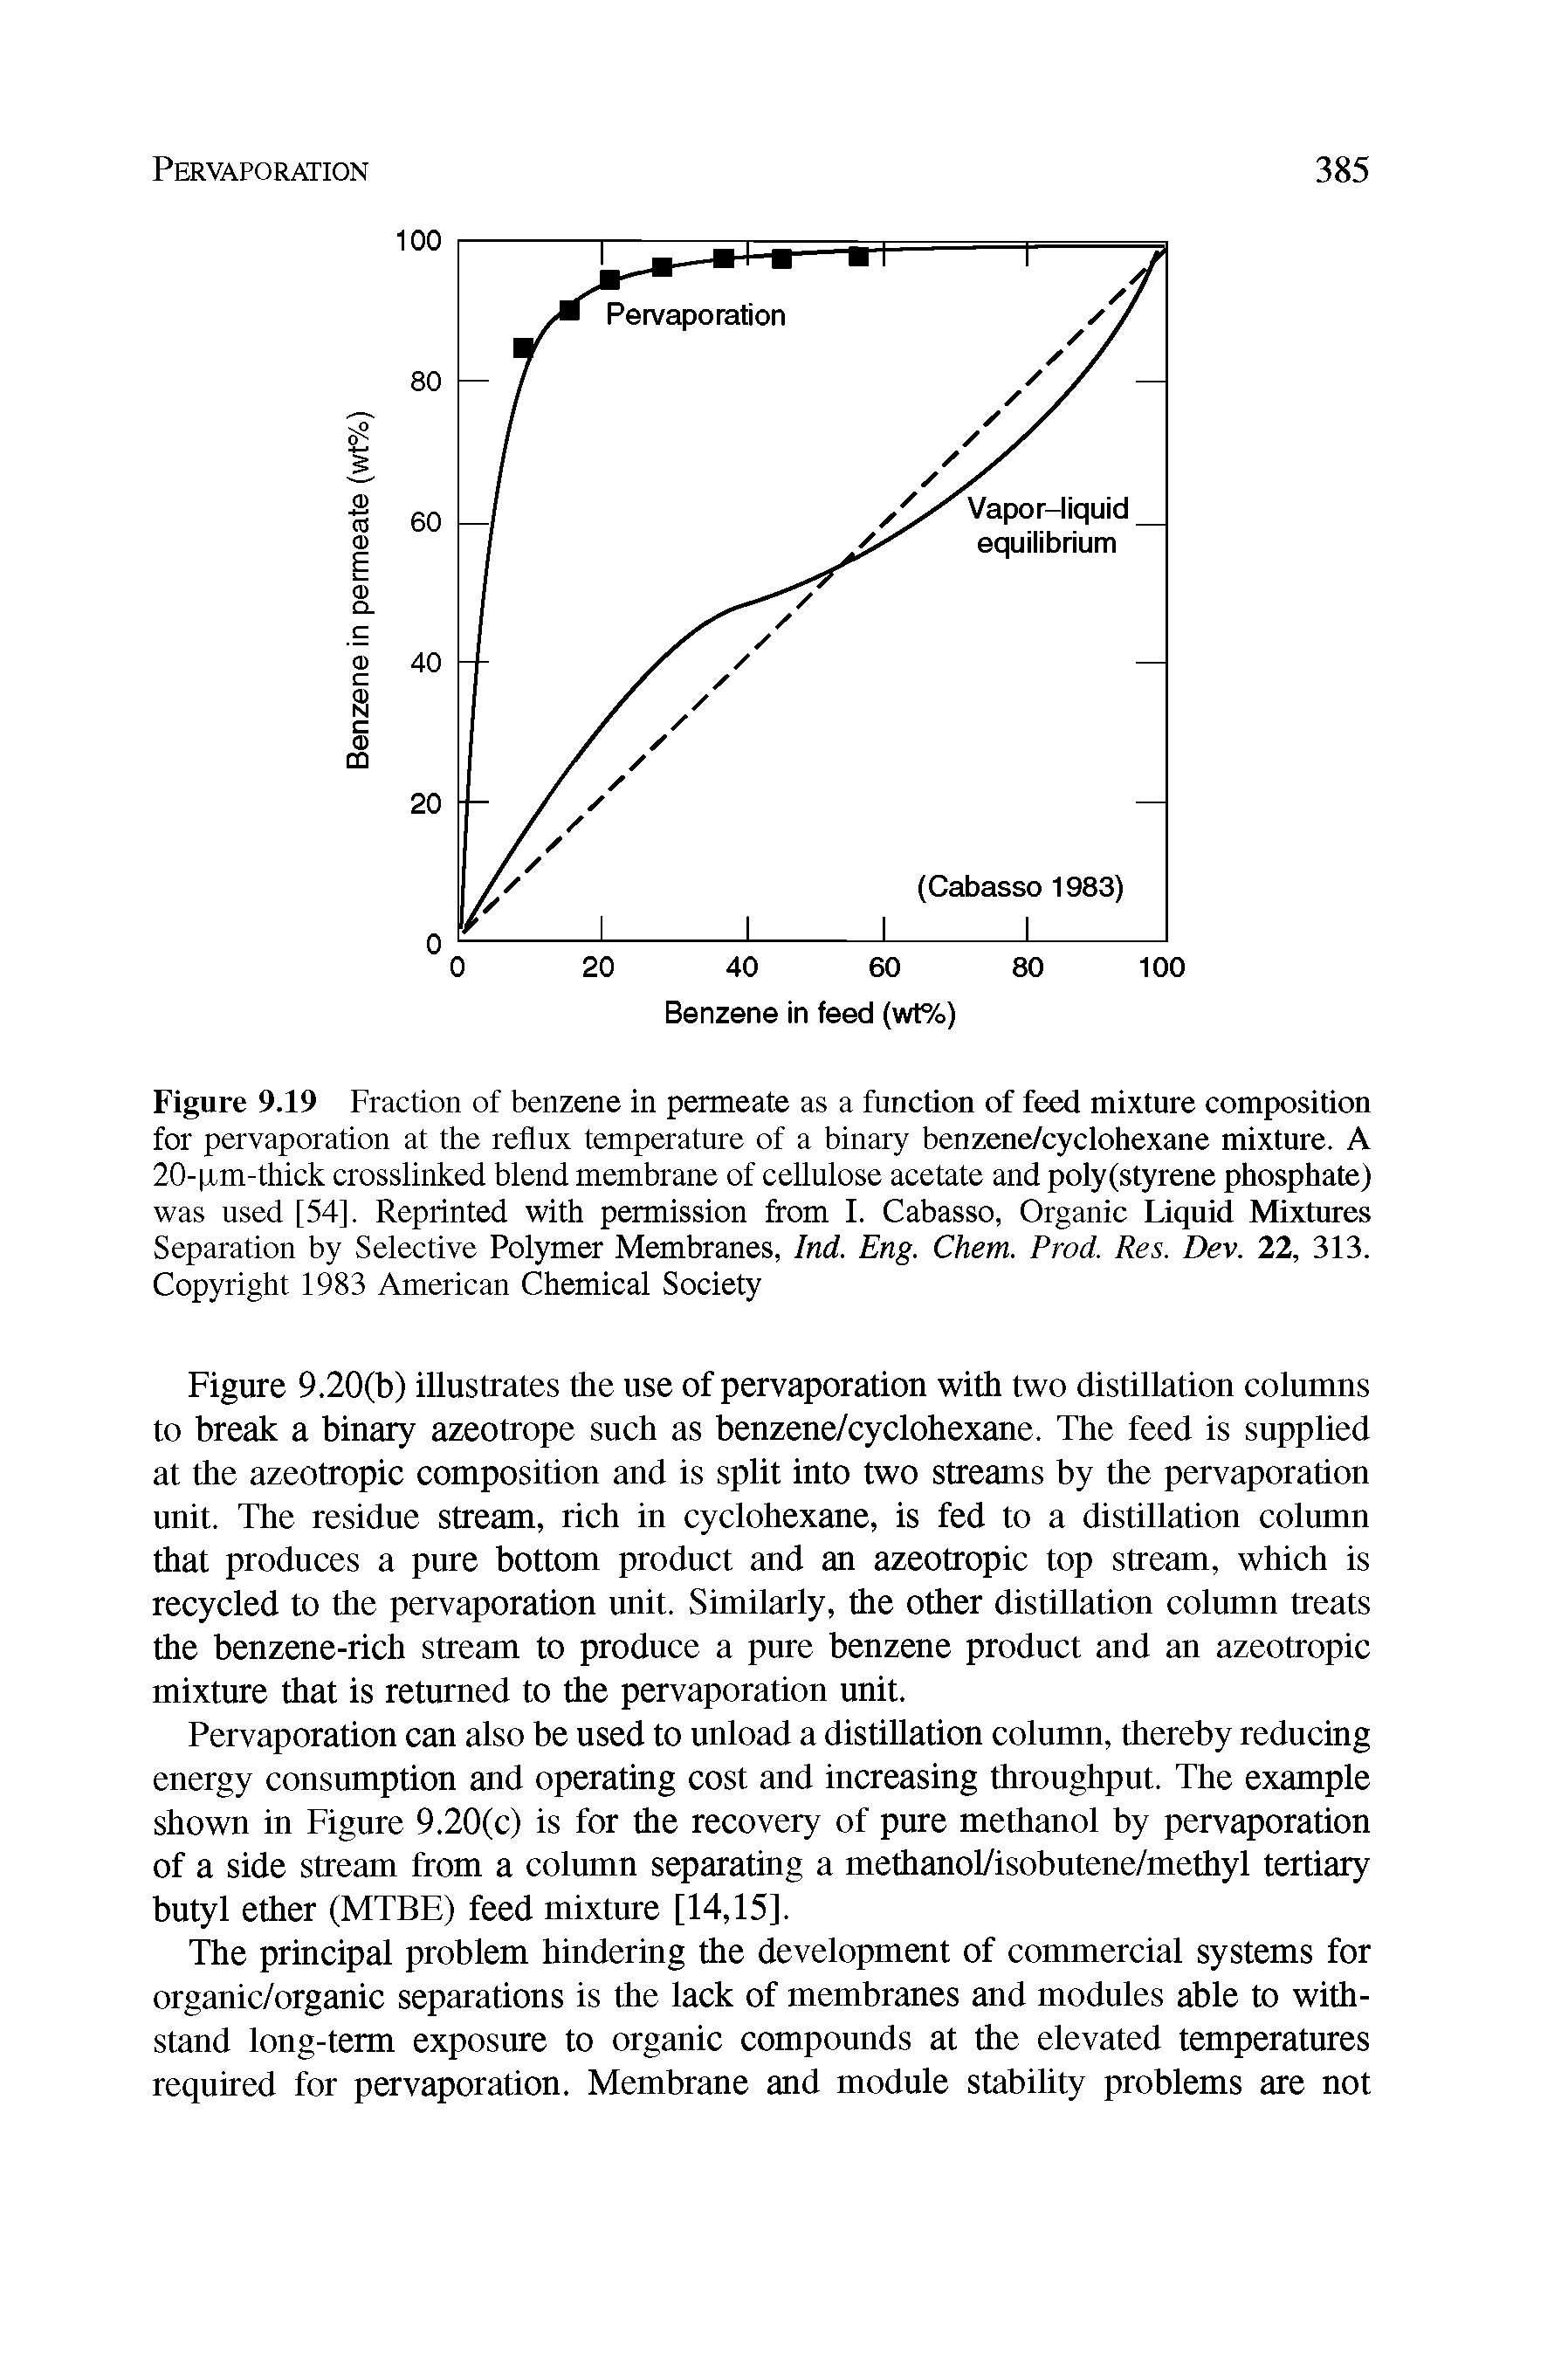 Figure 9.19 Fraction of benzene in permeate as a function of feed mixture composition for pervaporation at the reflux temperature of a binary benzene/cyclohexane mixture. A 20-qm-thick crosslinked blend membrane of cellulose acetate and polystyrene phosphate) was used [54]. Reprinted with permission from I. Cabasso, Organic Liquid Mixtures Separation by Selective Polymer Membranes, Ind. Eng. Chem. Prod. Res. Dev. 22, 313. Copyright 1983 American Chemical Society...